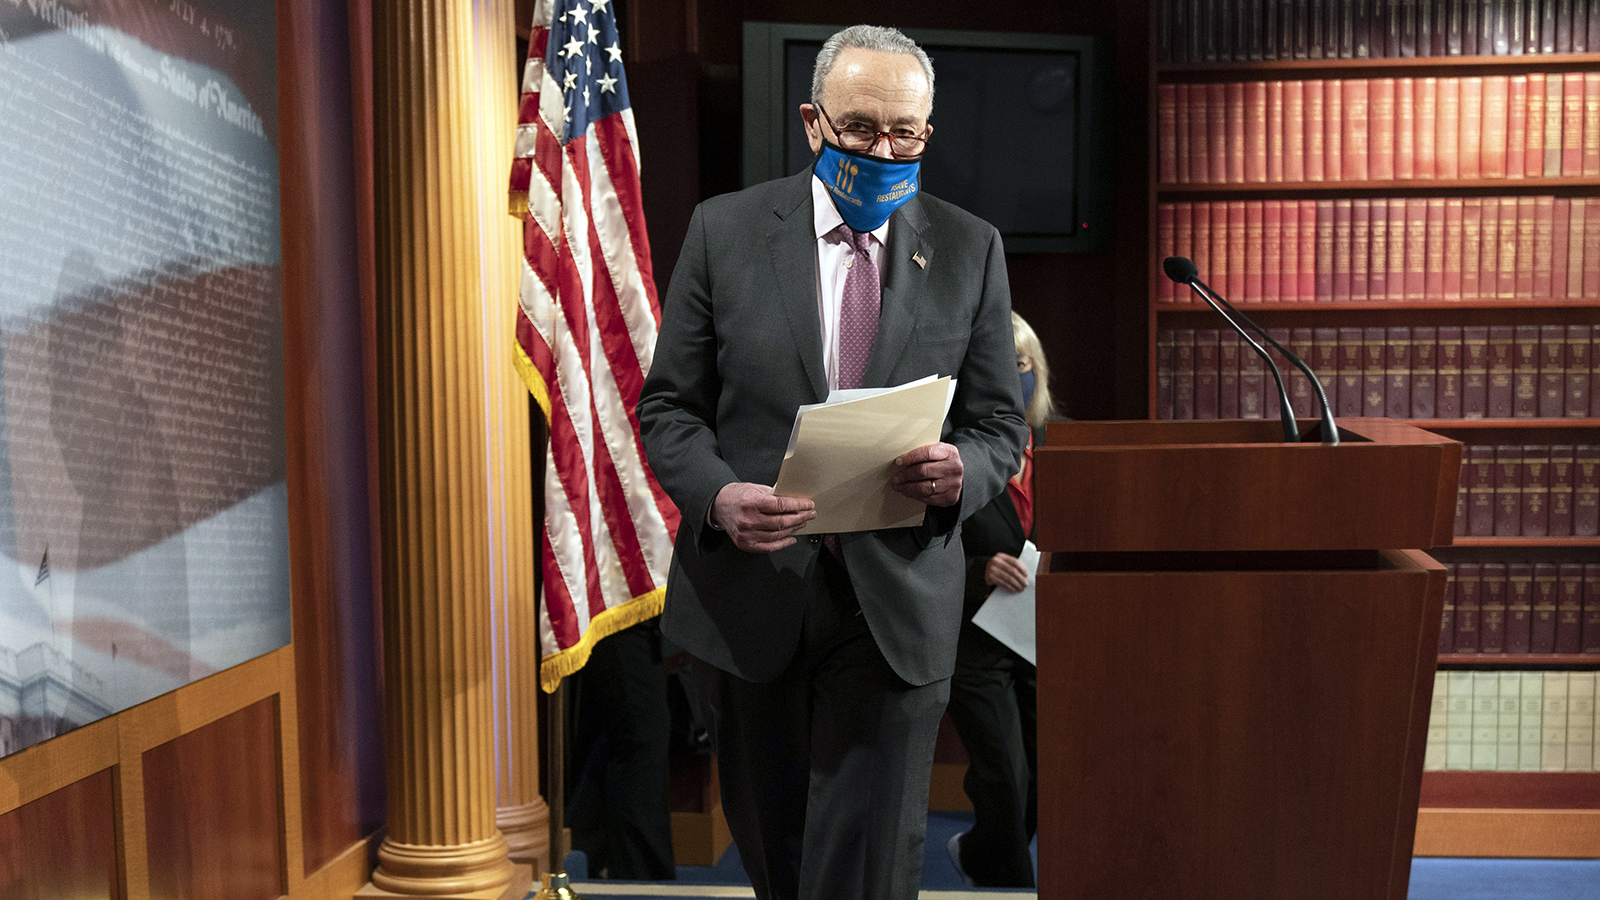 Senate Majority Leader Chuck Schumer arrives to speak to the media on Tuesday, March 2, on Capitol Hill in Washington.